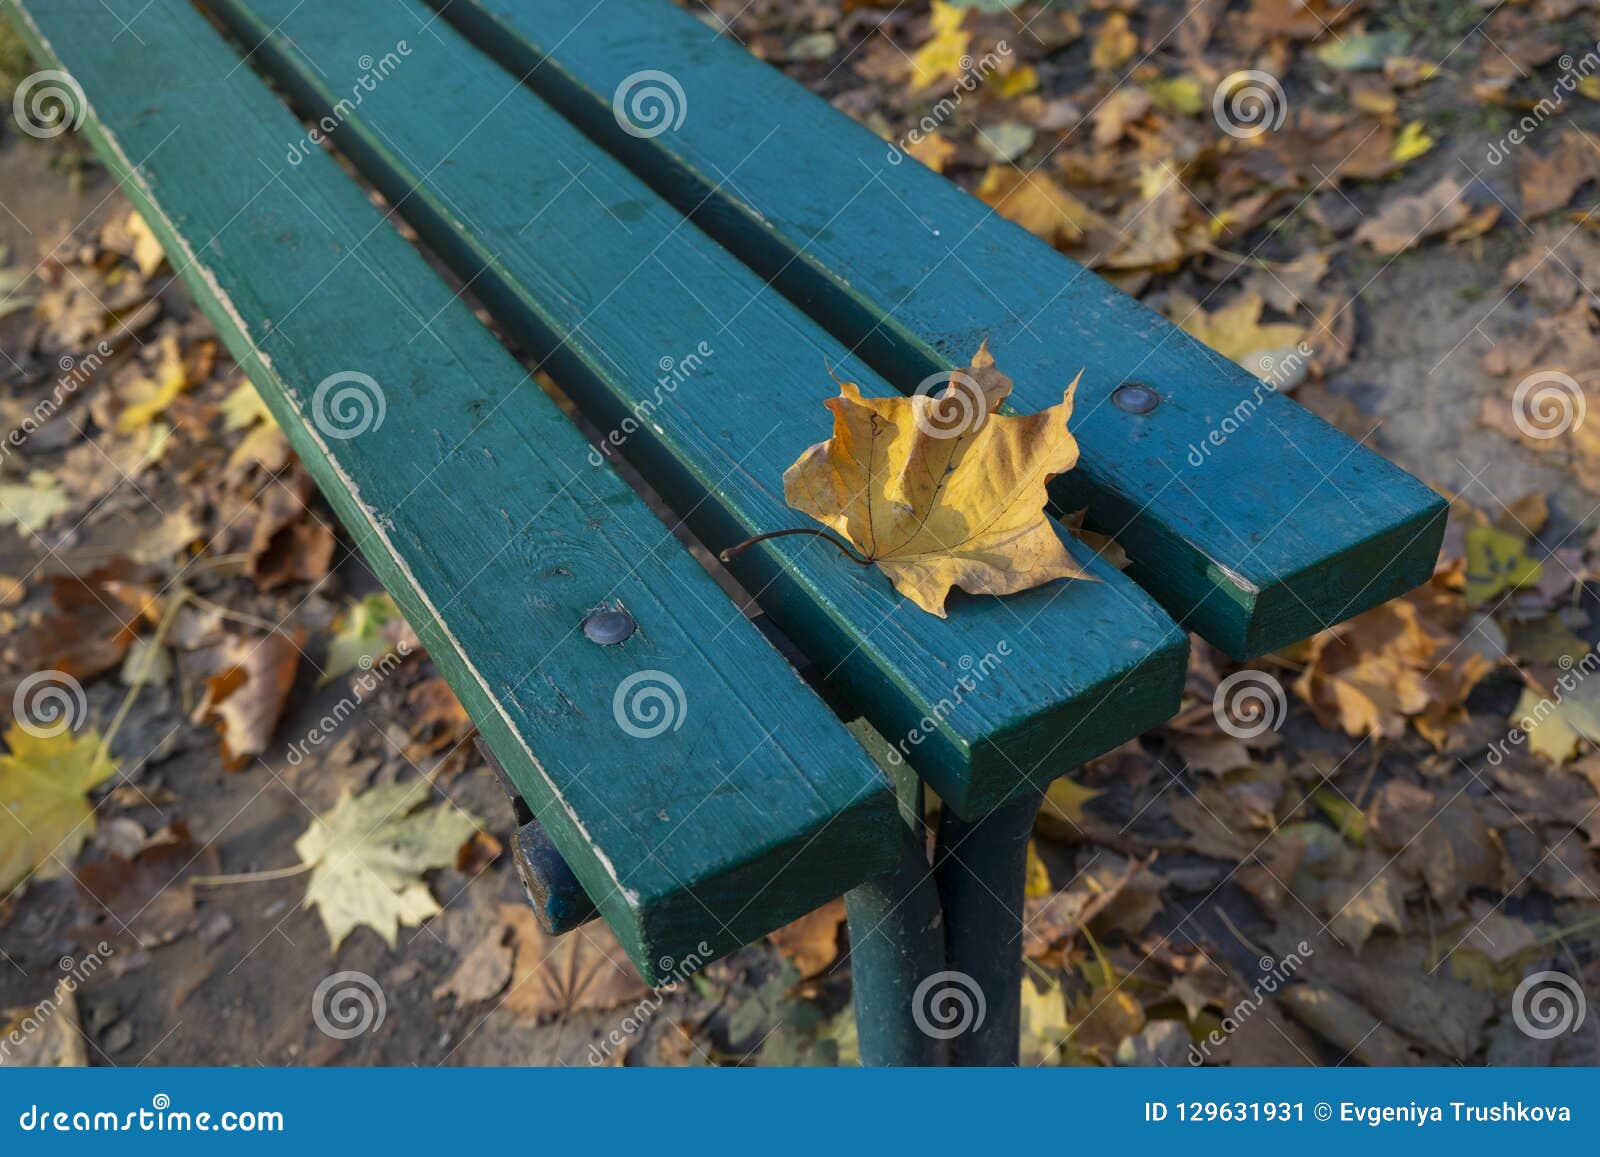 Falling Leaves. Autumn in City Park in Yellow Leaves. Stock Image